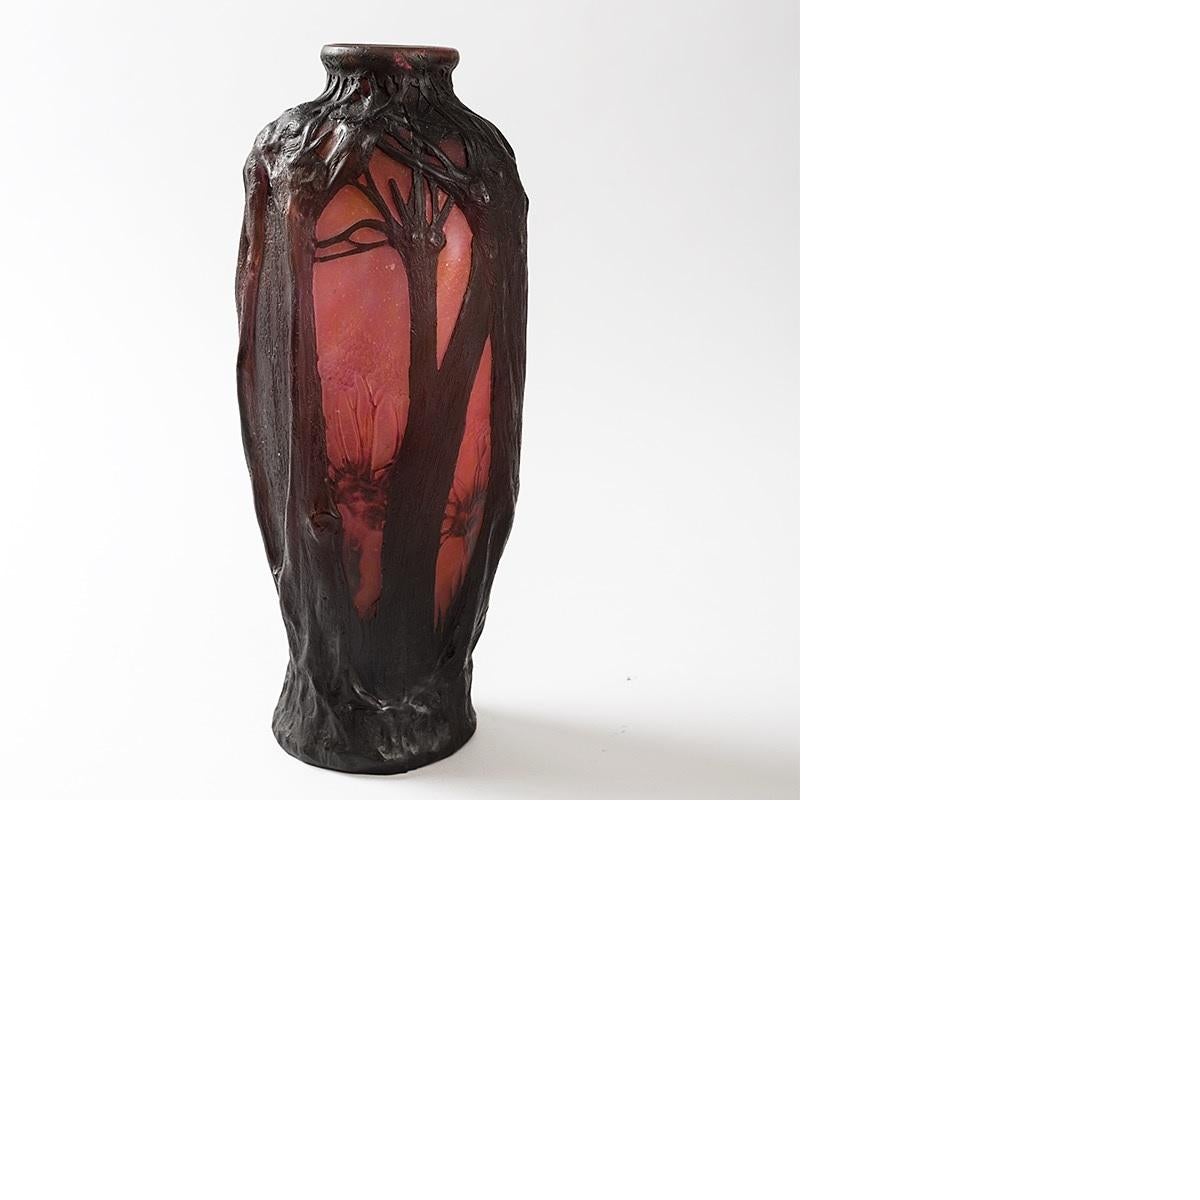 A French 'Paysage, moulage en relief' cameo glass vase by Daum. This vase depicts dark brown tree trunks, roots and branches in relief against a rose colored sky. In the clearings are carved flowers on stems, circa 1910.

A vase with similar motif